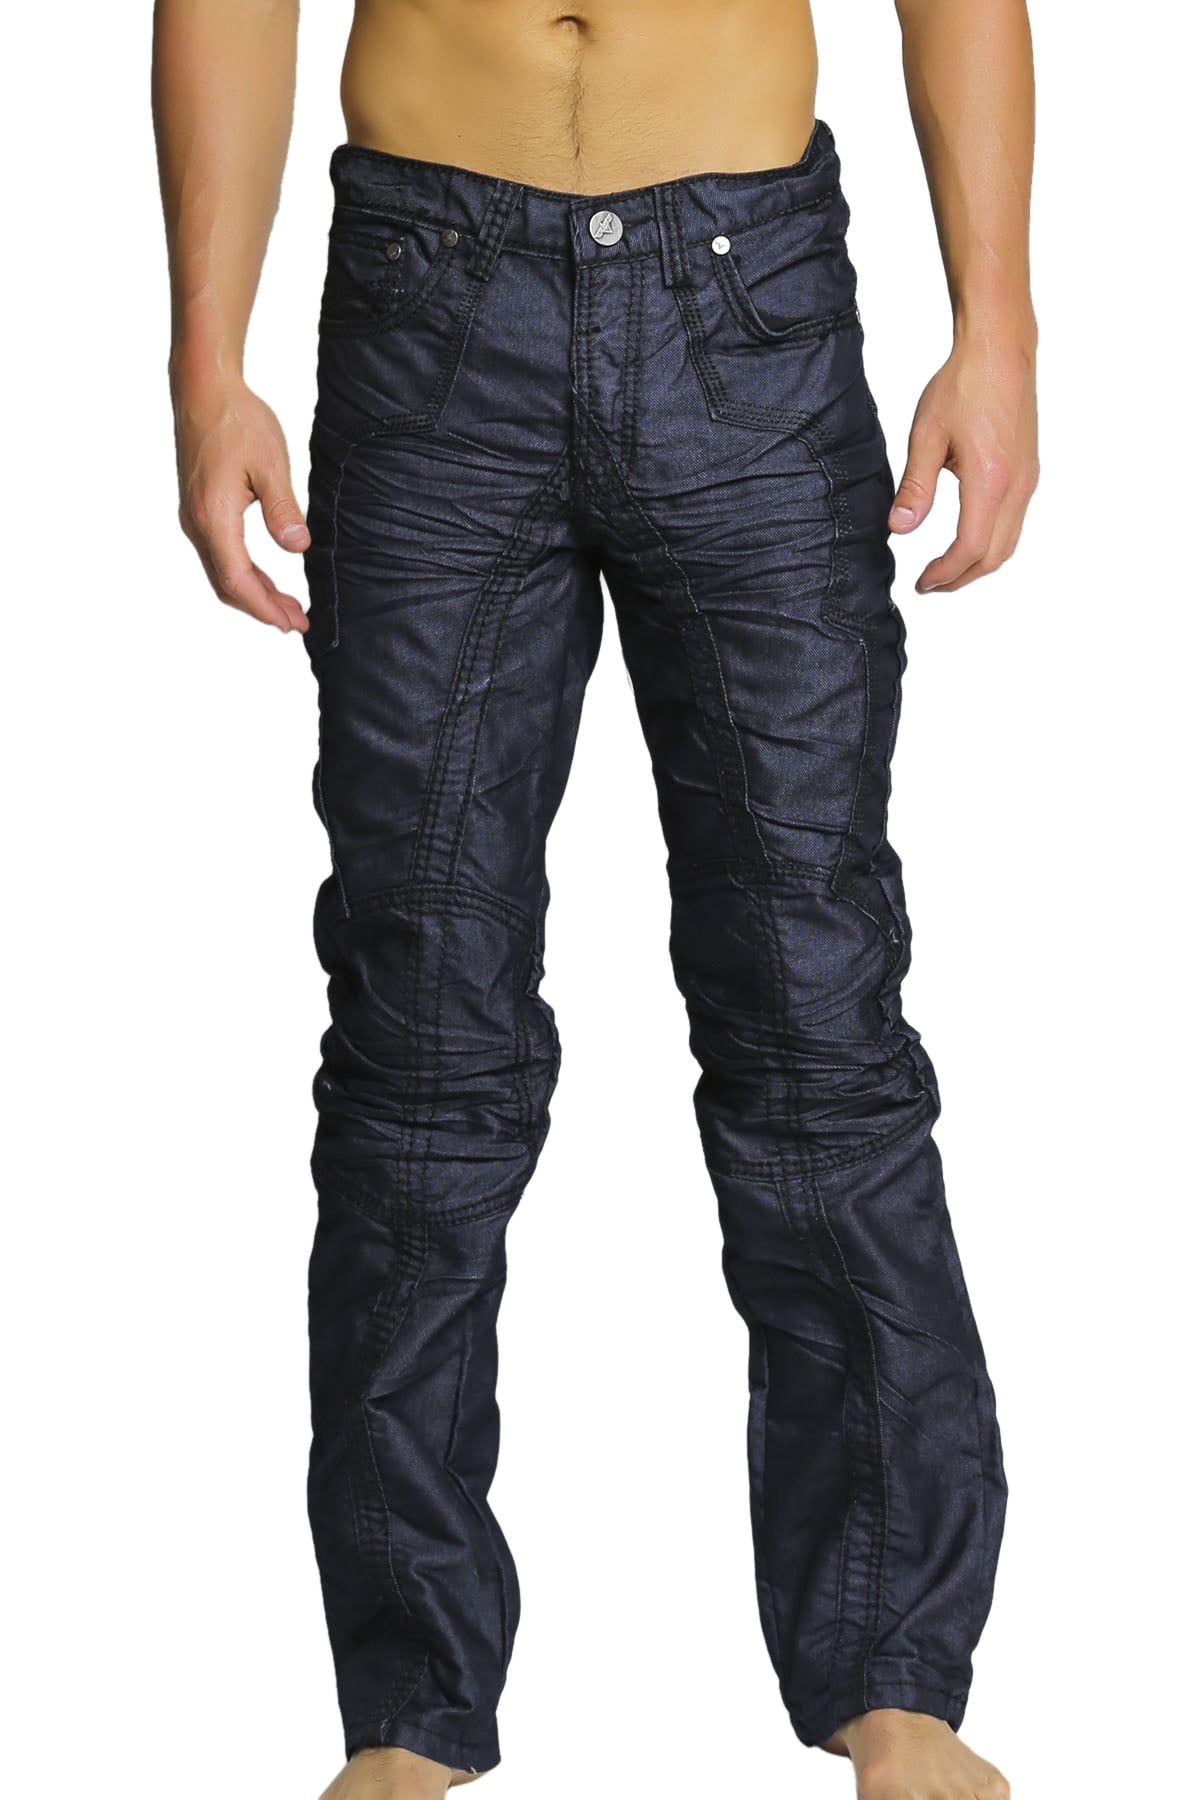 V.I.P. Collection Dark Blue Collection Crossfire Jean